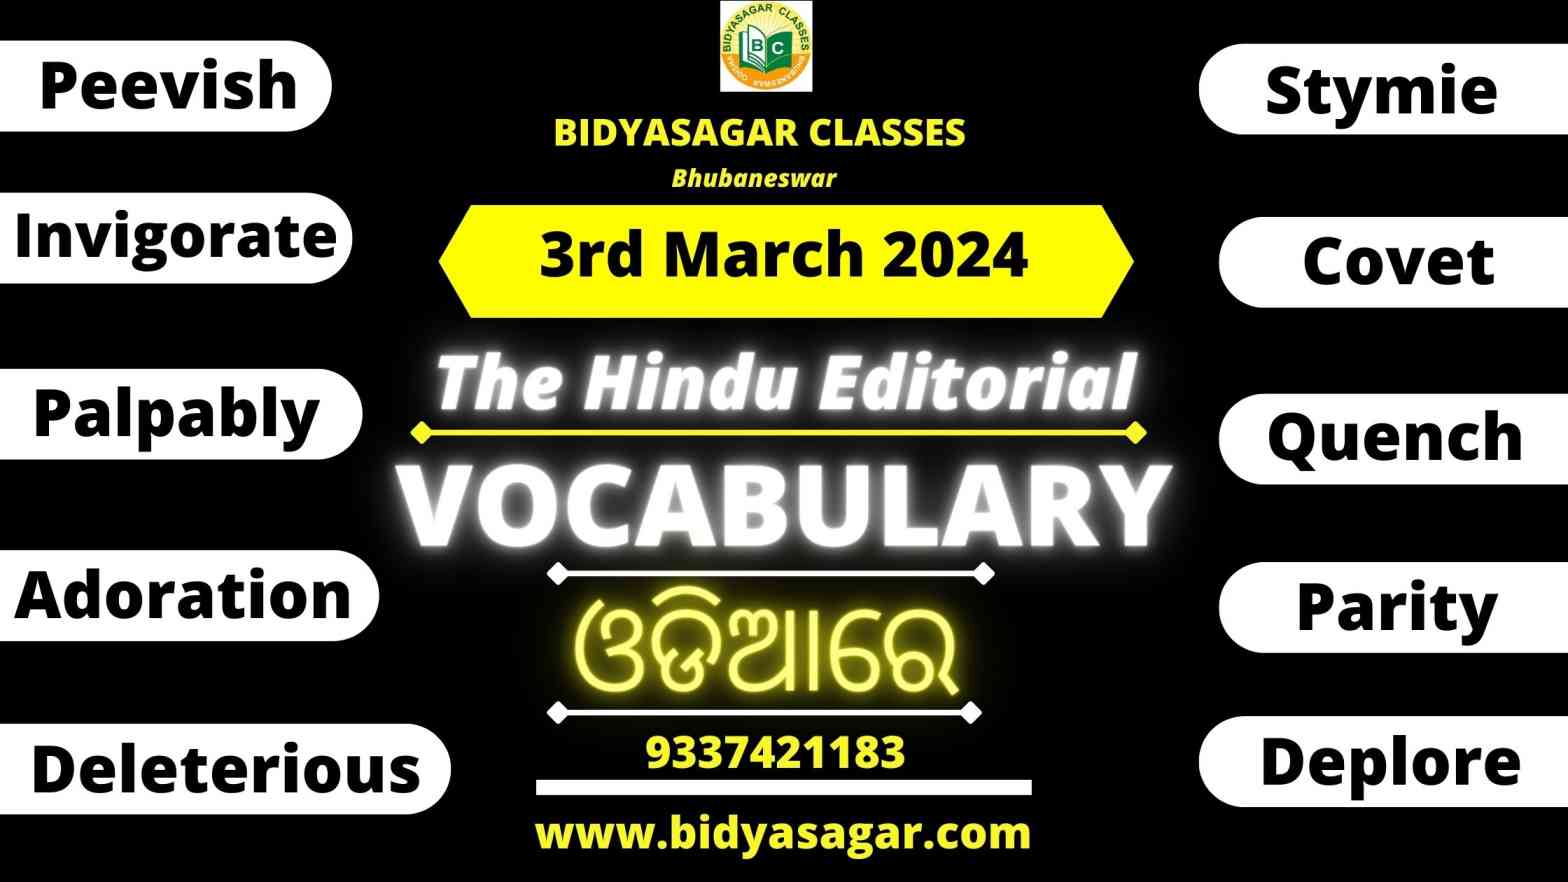 The Hindu Editorial Vocabulary of 3rd March 2024